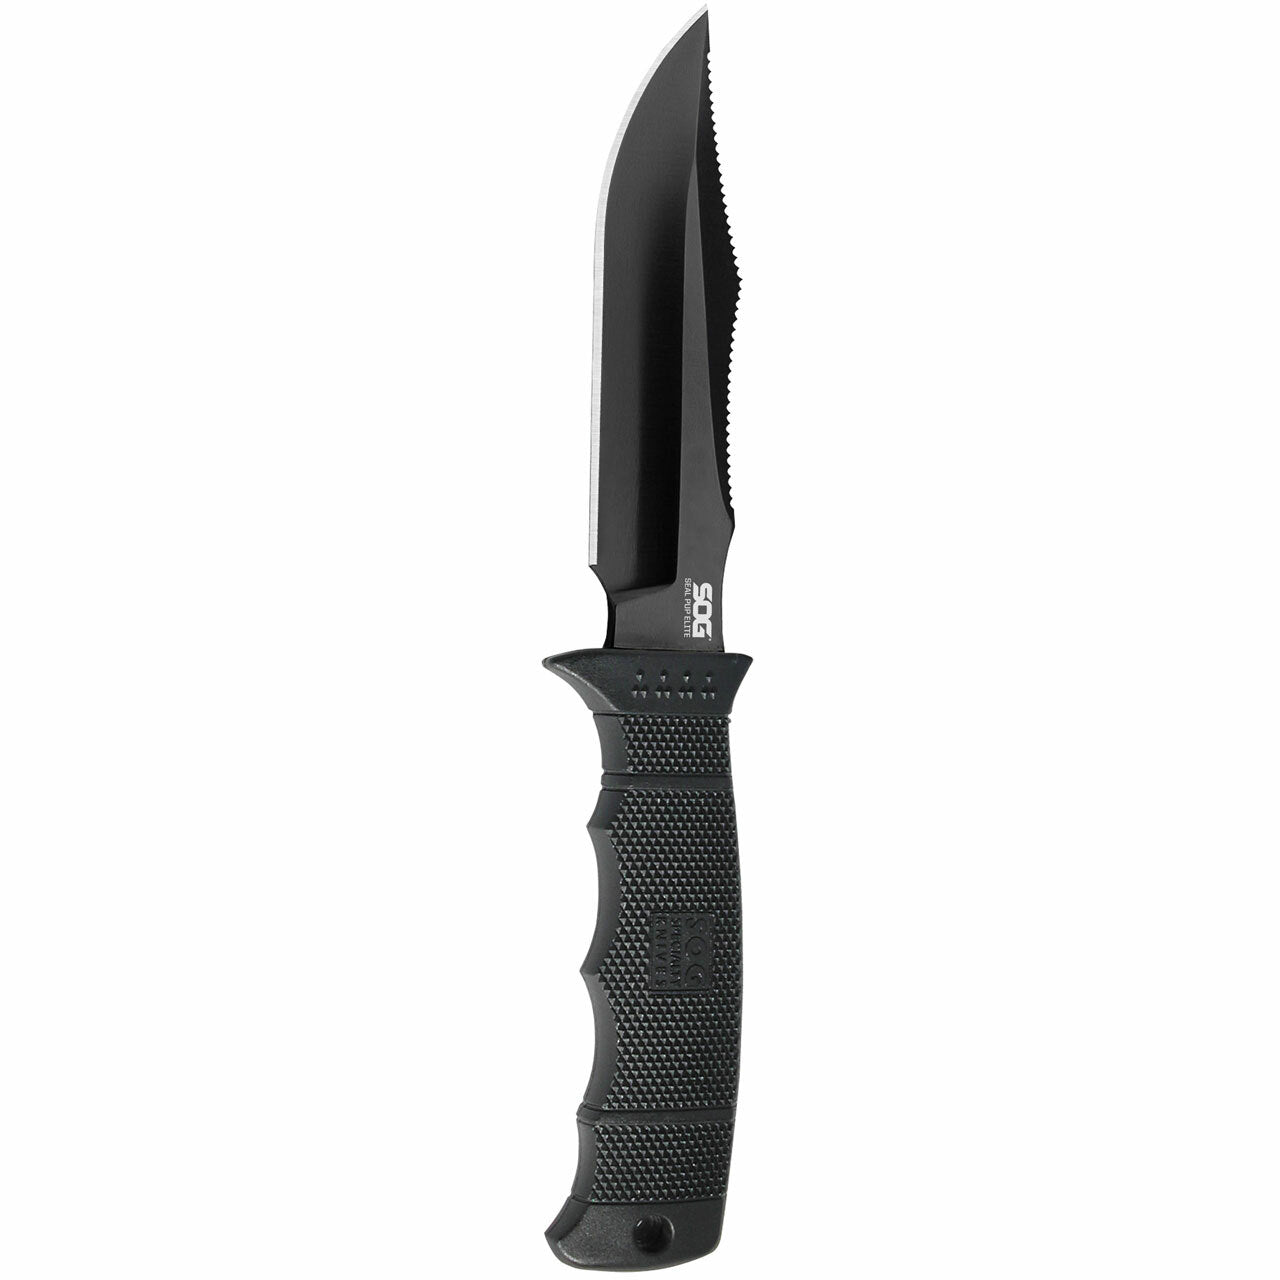 SOG Seal Pup Elite Fixed Blade Knife